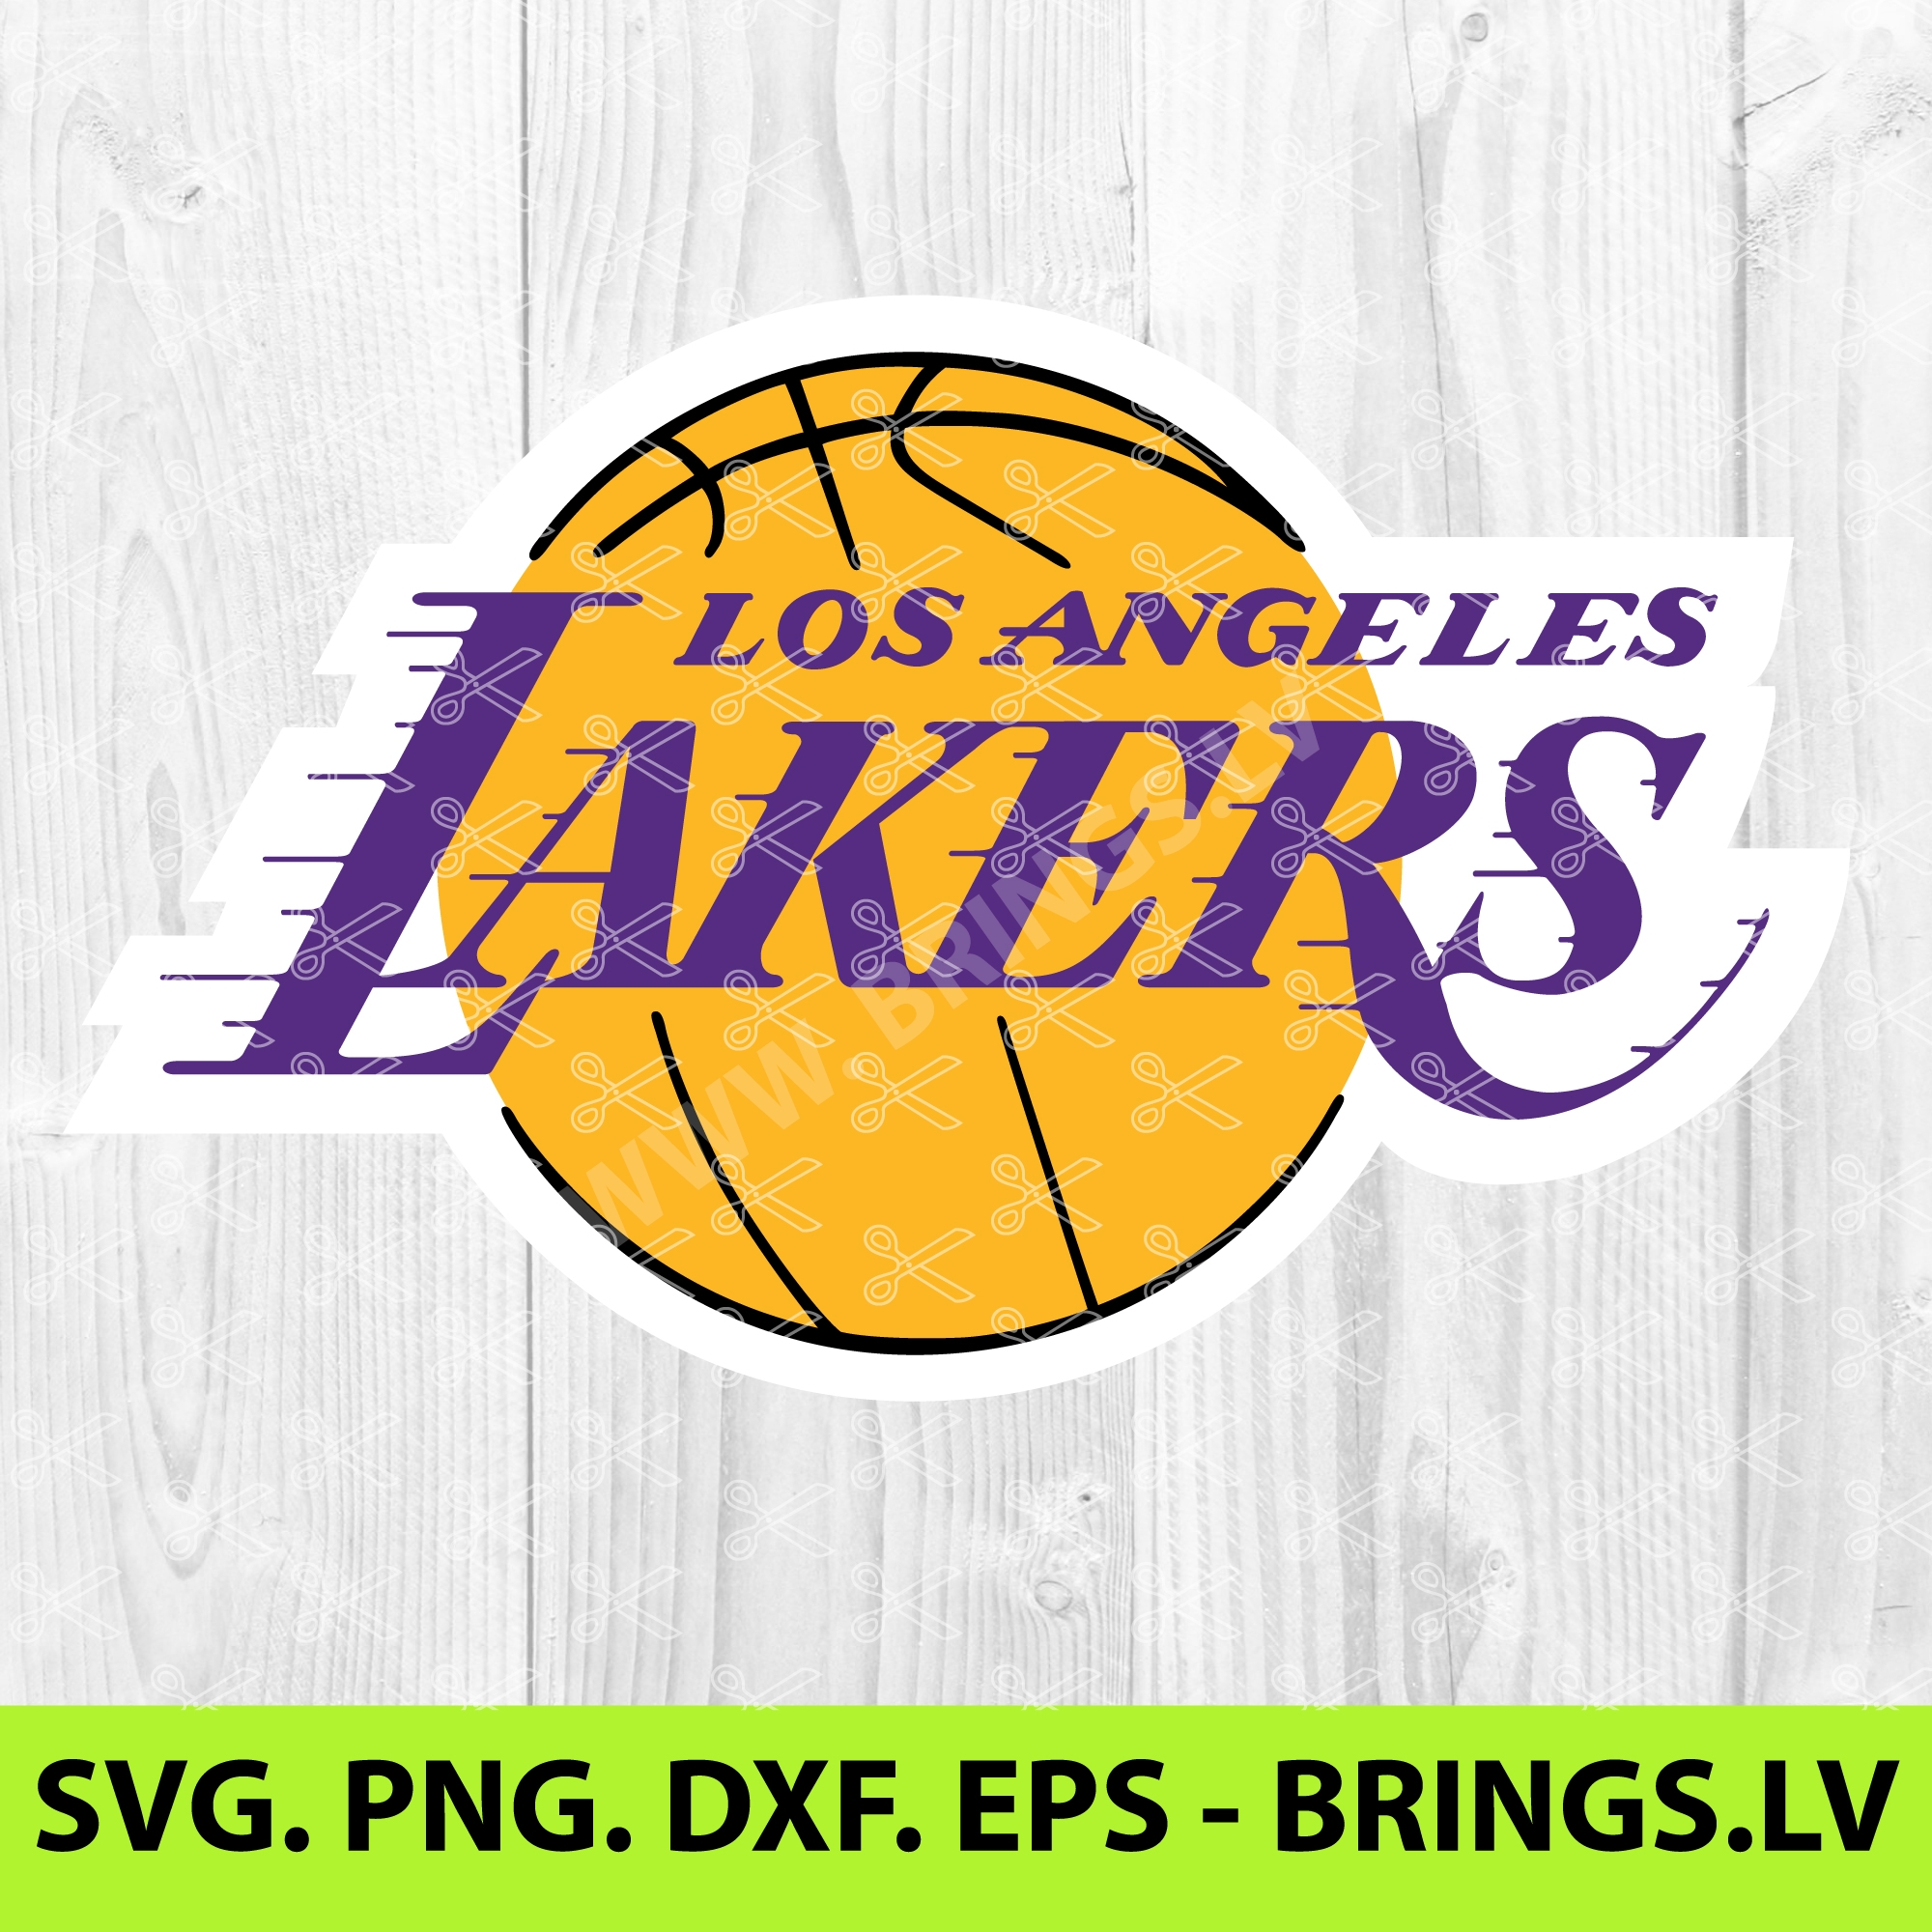 LAKERS SVG